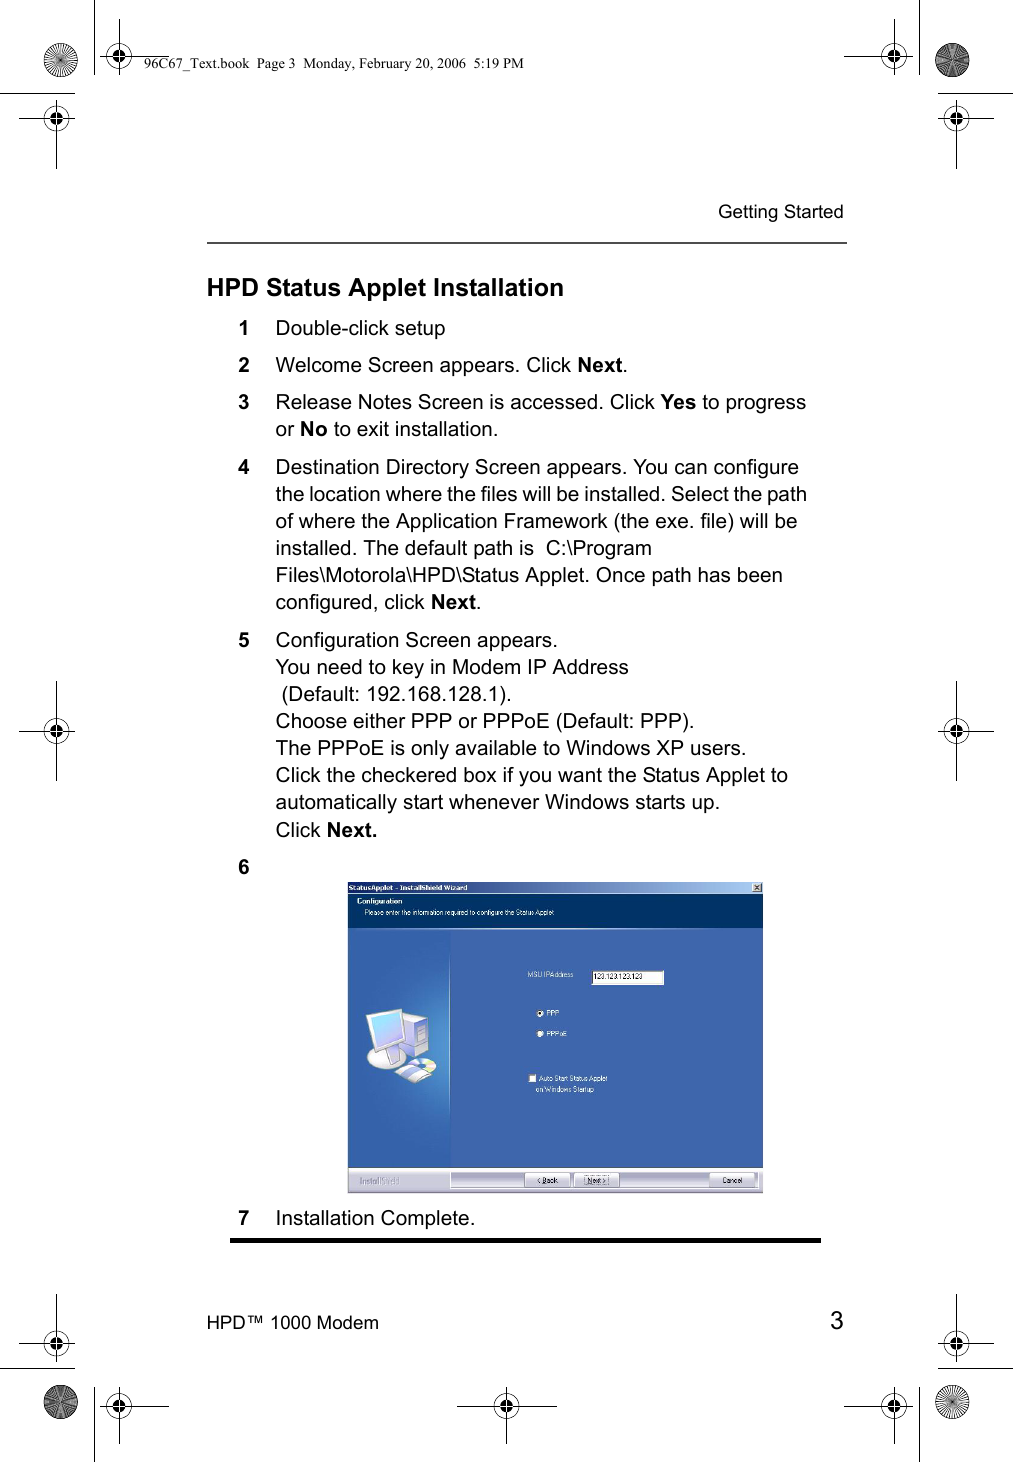 HPD™ 1000 Modem 3Getting StartedHPD Status Applet Installation1Double-click setup2Welcome Screen appears. Click Next.3Release Notes Screen is accessed. Click Yes to progress or No to exit installation. 4Destination Directory Screen appears. You can configure the location where the files will be installed. Select the path of where the Application Framework (the exe. file) will be installed. The default path is  C:\Program Files\Motorola\HPD\Status Applet. Once path has been configured, click Next.5Configuration Screen appears. You need to key in Modem IP Address (Default: 192.168.128.1). Choose either PPP or PPPoE (Default: PPP). The PPPoE is only available to Windows XP users.Click the checkered box if you want the Status Applet to automatically start whenever Windows starts up. Click Next.67Installation Complete.96C67_Text.book  Page 3  Monday, February 20, 2006  5:19 PM